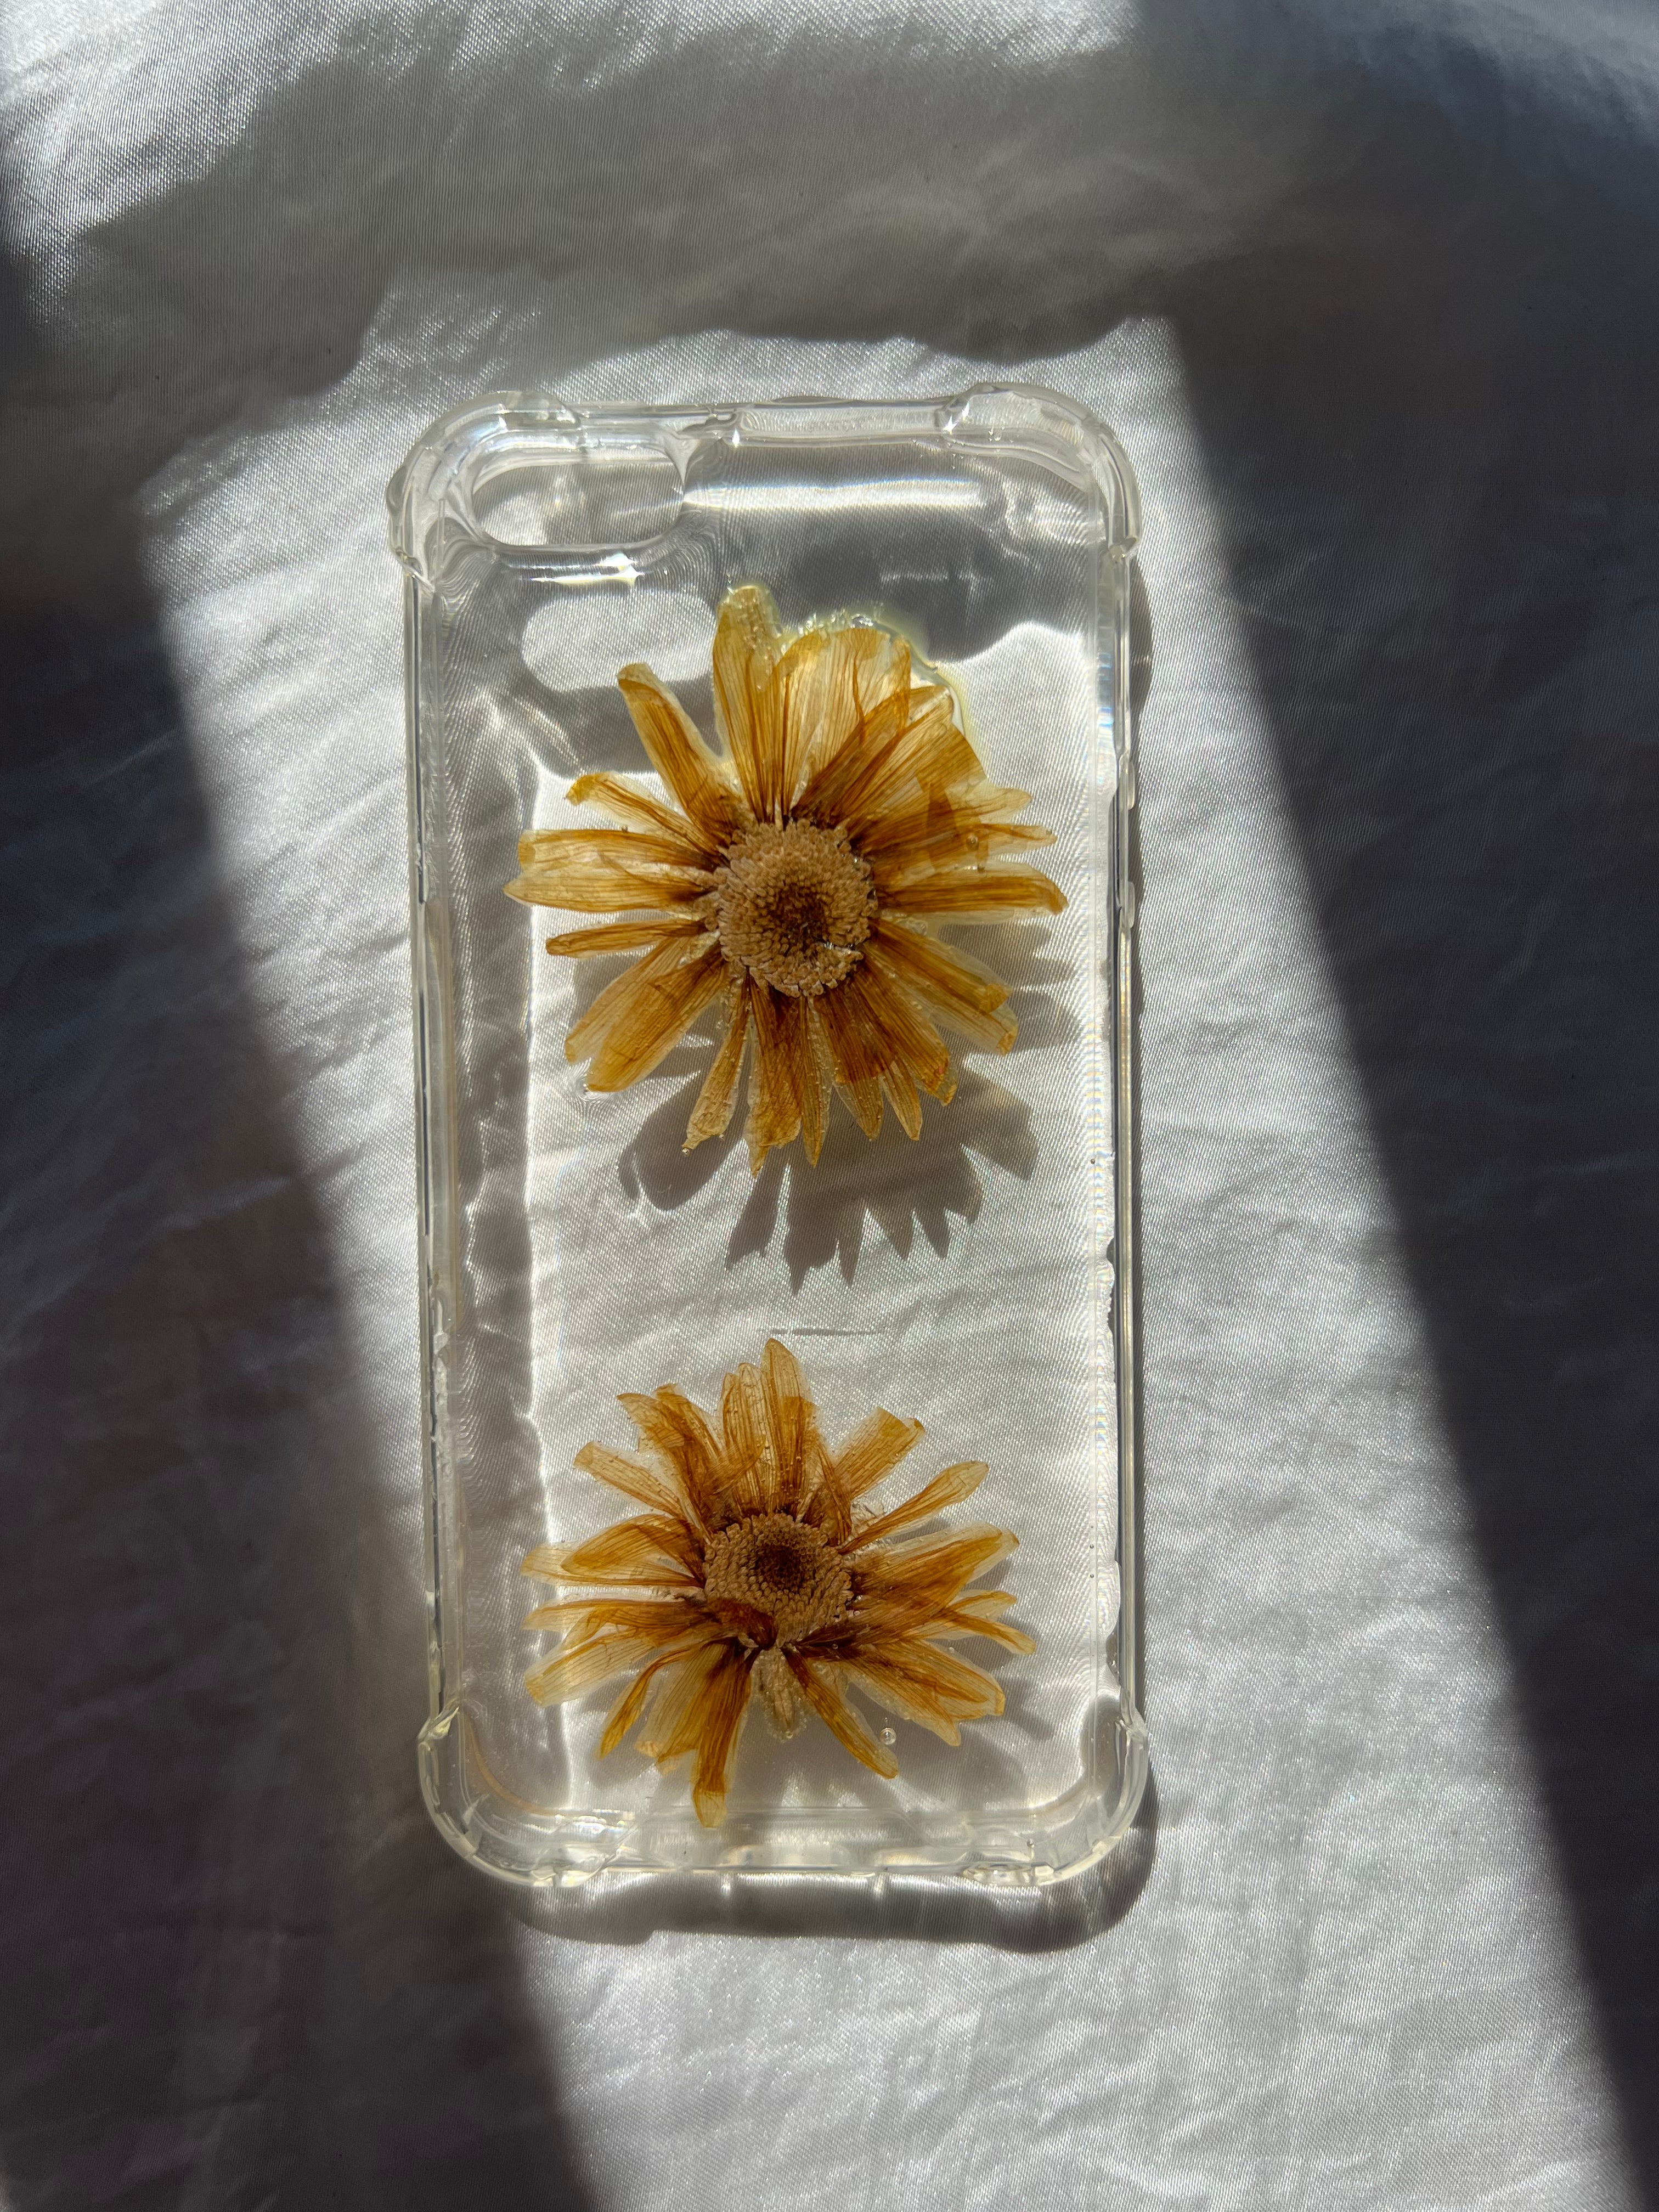 Pressed flower phone case for the iphone SE made with yellow daisies pressed flower phone case, botanical phone case, pressed flower art, handmade phone case, real pressed flowers, australian made, botanical art, pressed flower artist, floral art, botanical preservation, resin and flowers, flowers in resin, phone accessories, 